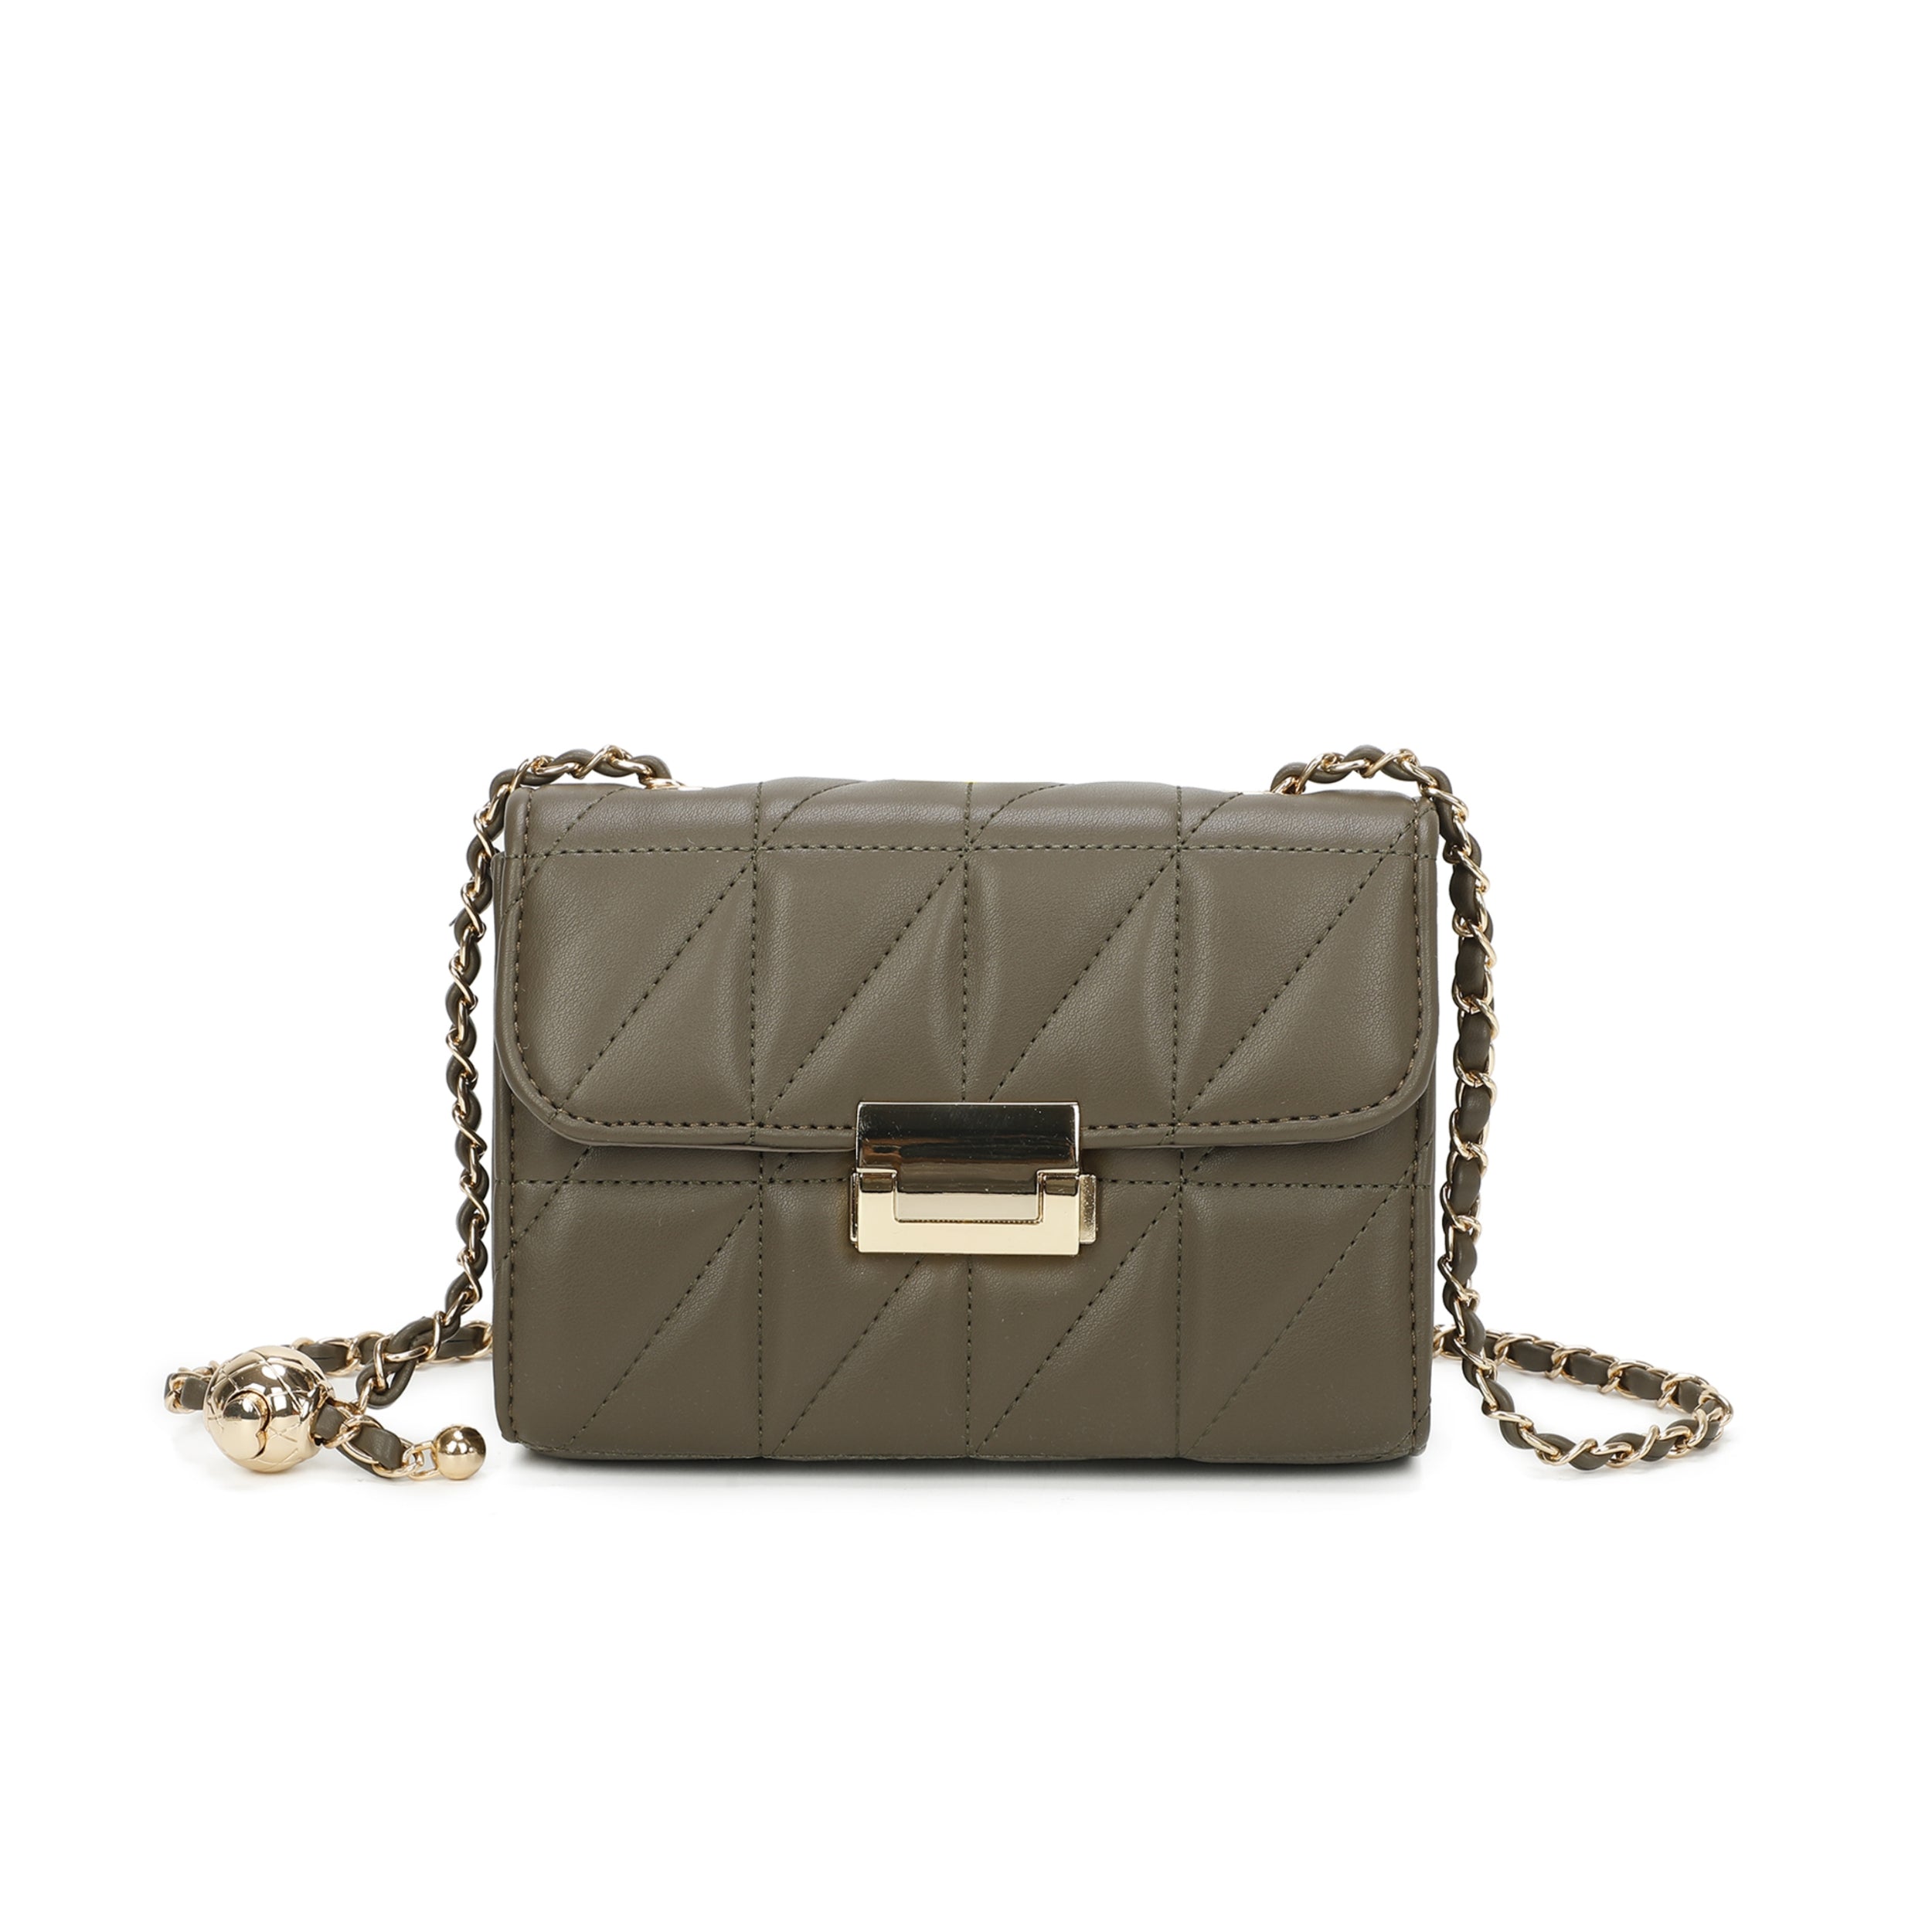 Craze London Quilted Crossbody Bag Top flap with magdot